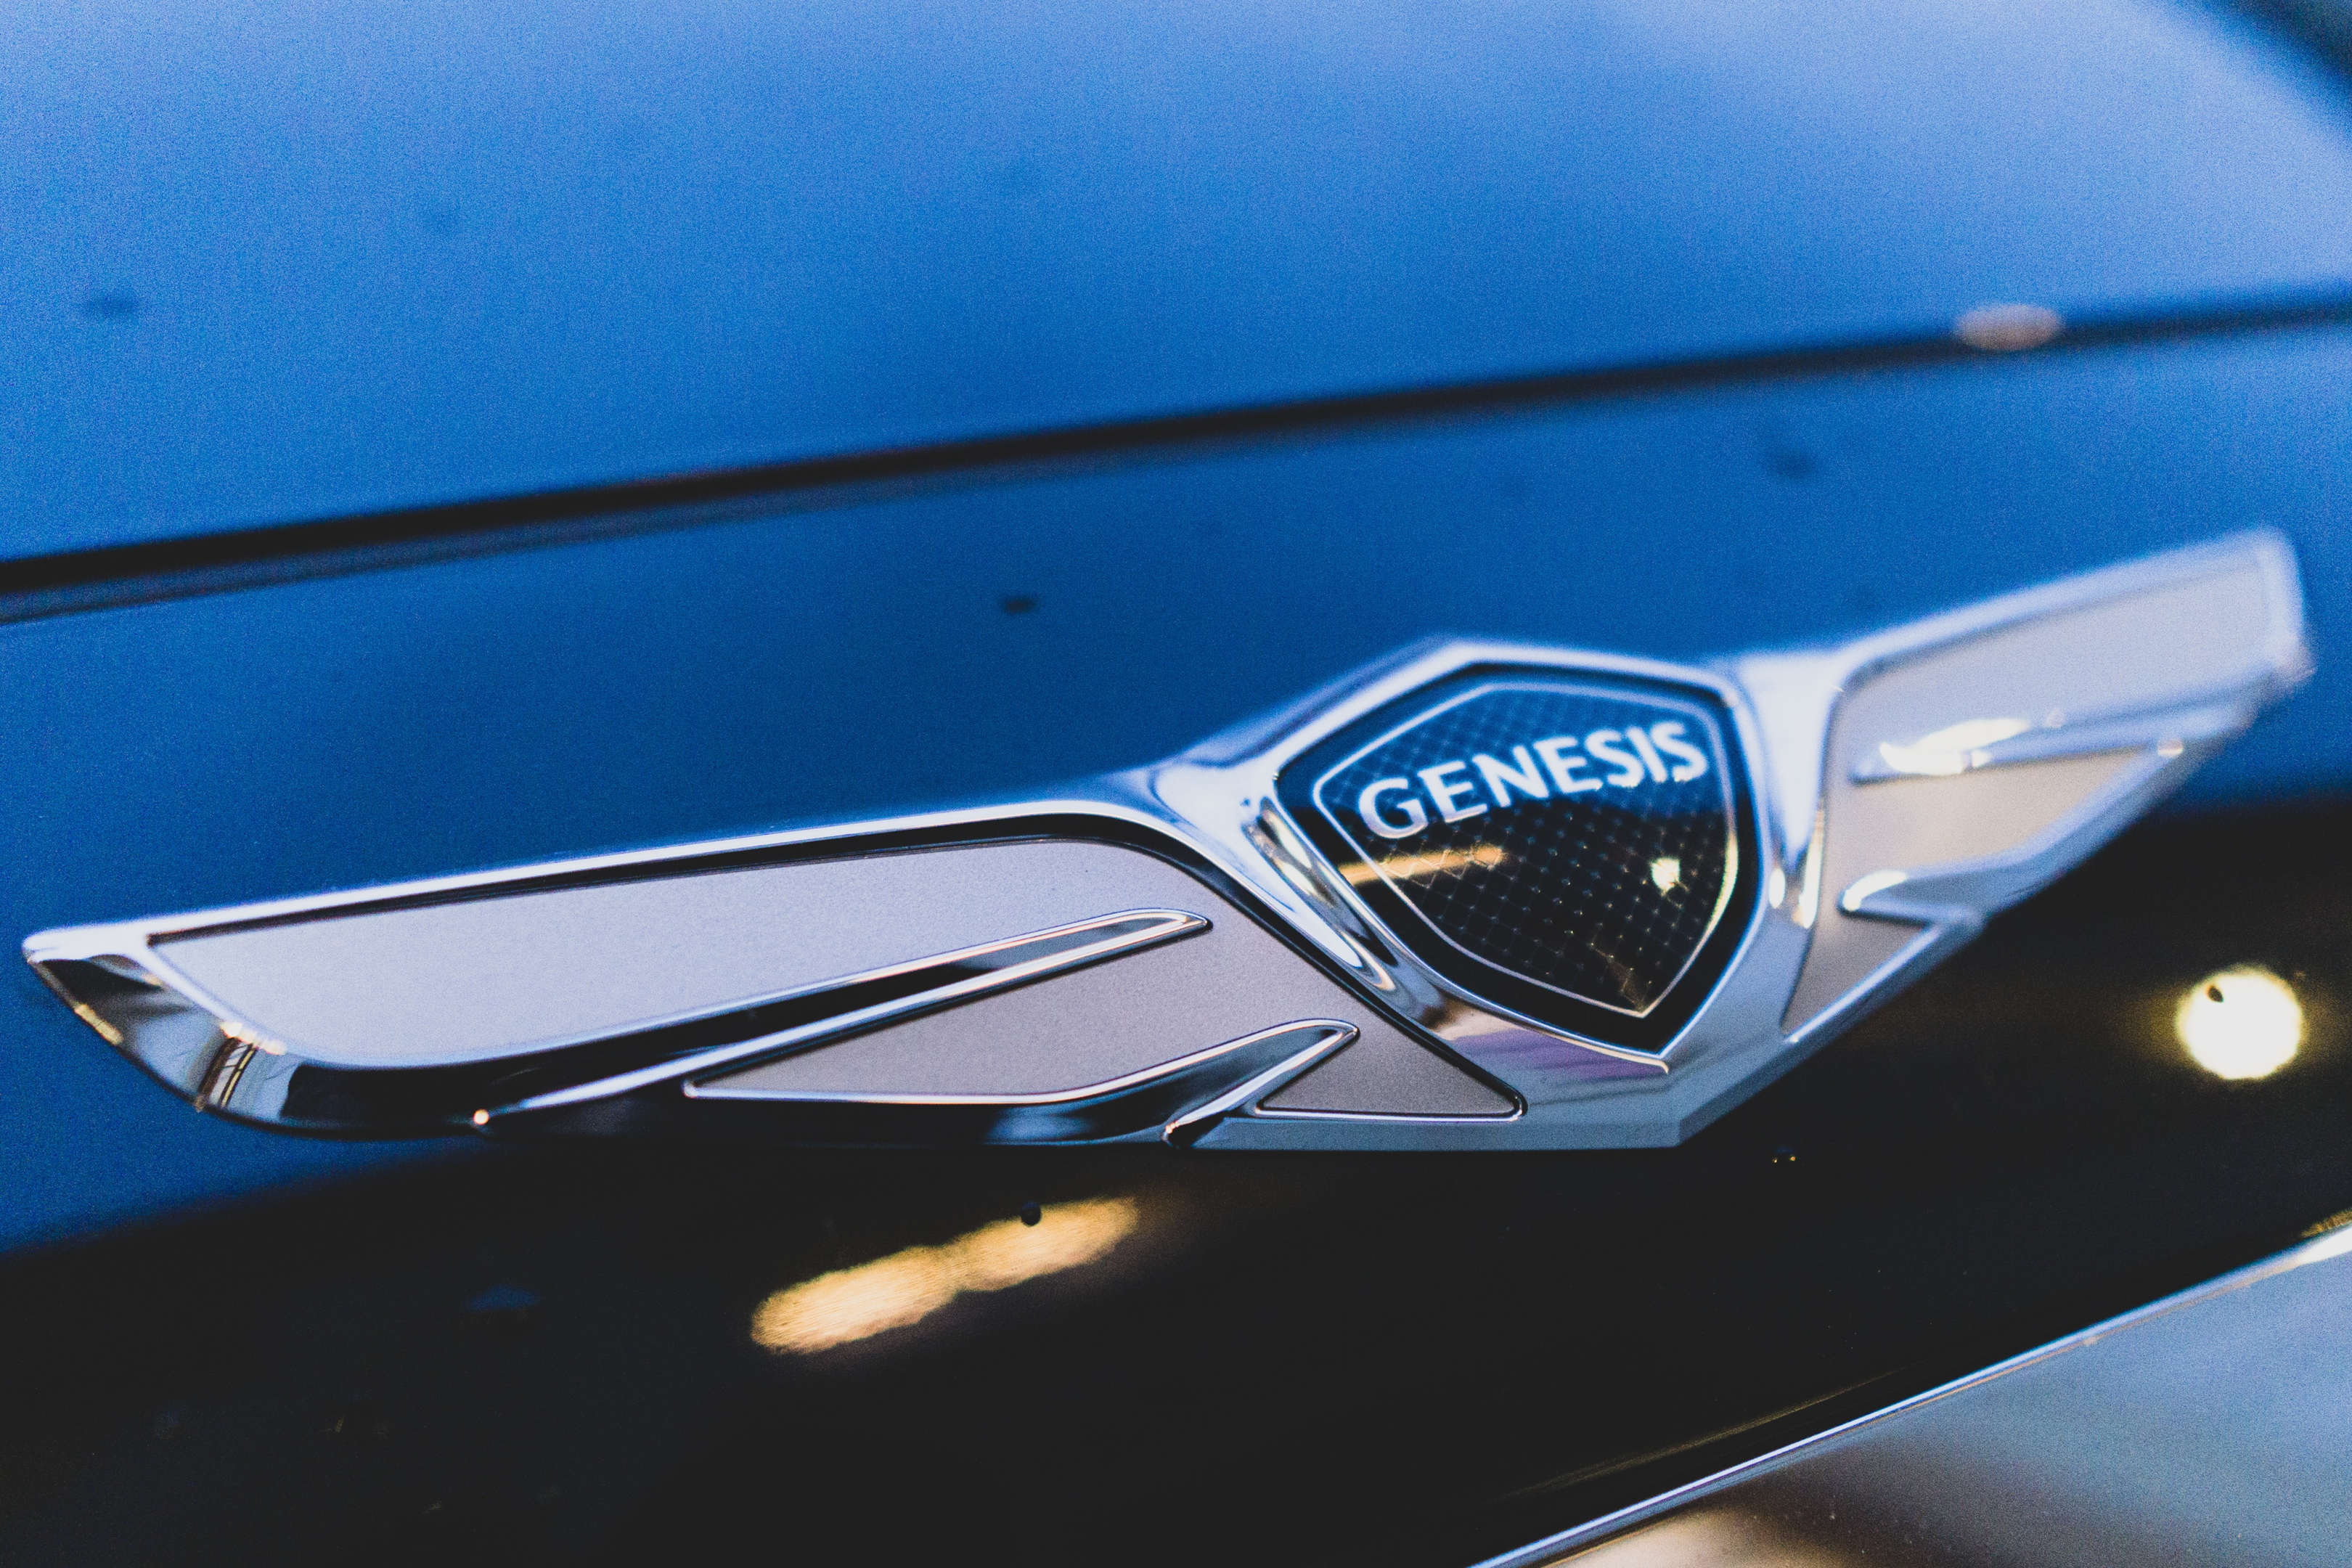 Genesis badge on car's front, close up